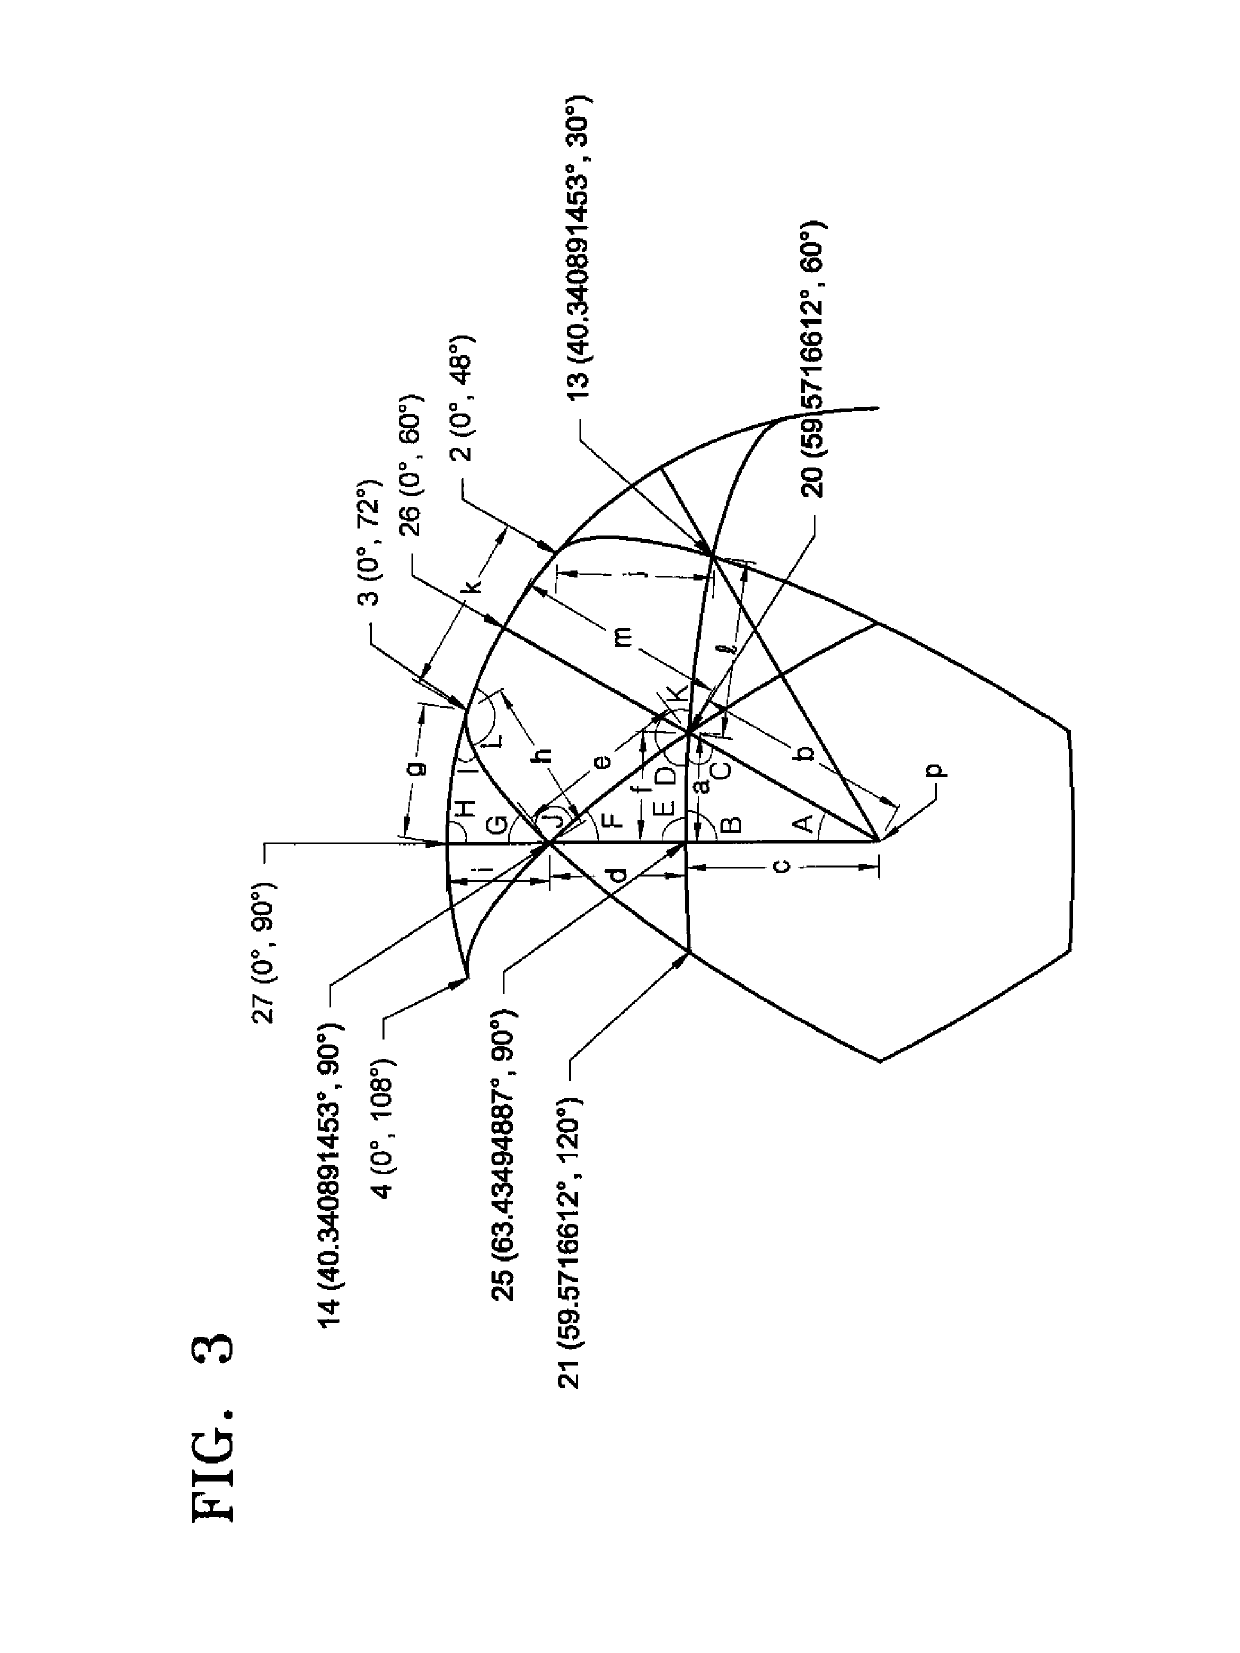 Method of dividing spherical surface of golf ball, and golf ball having surface divided by method